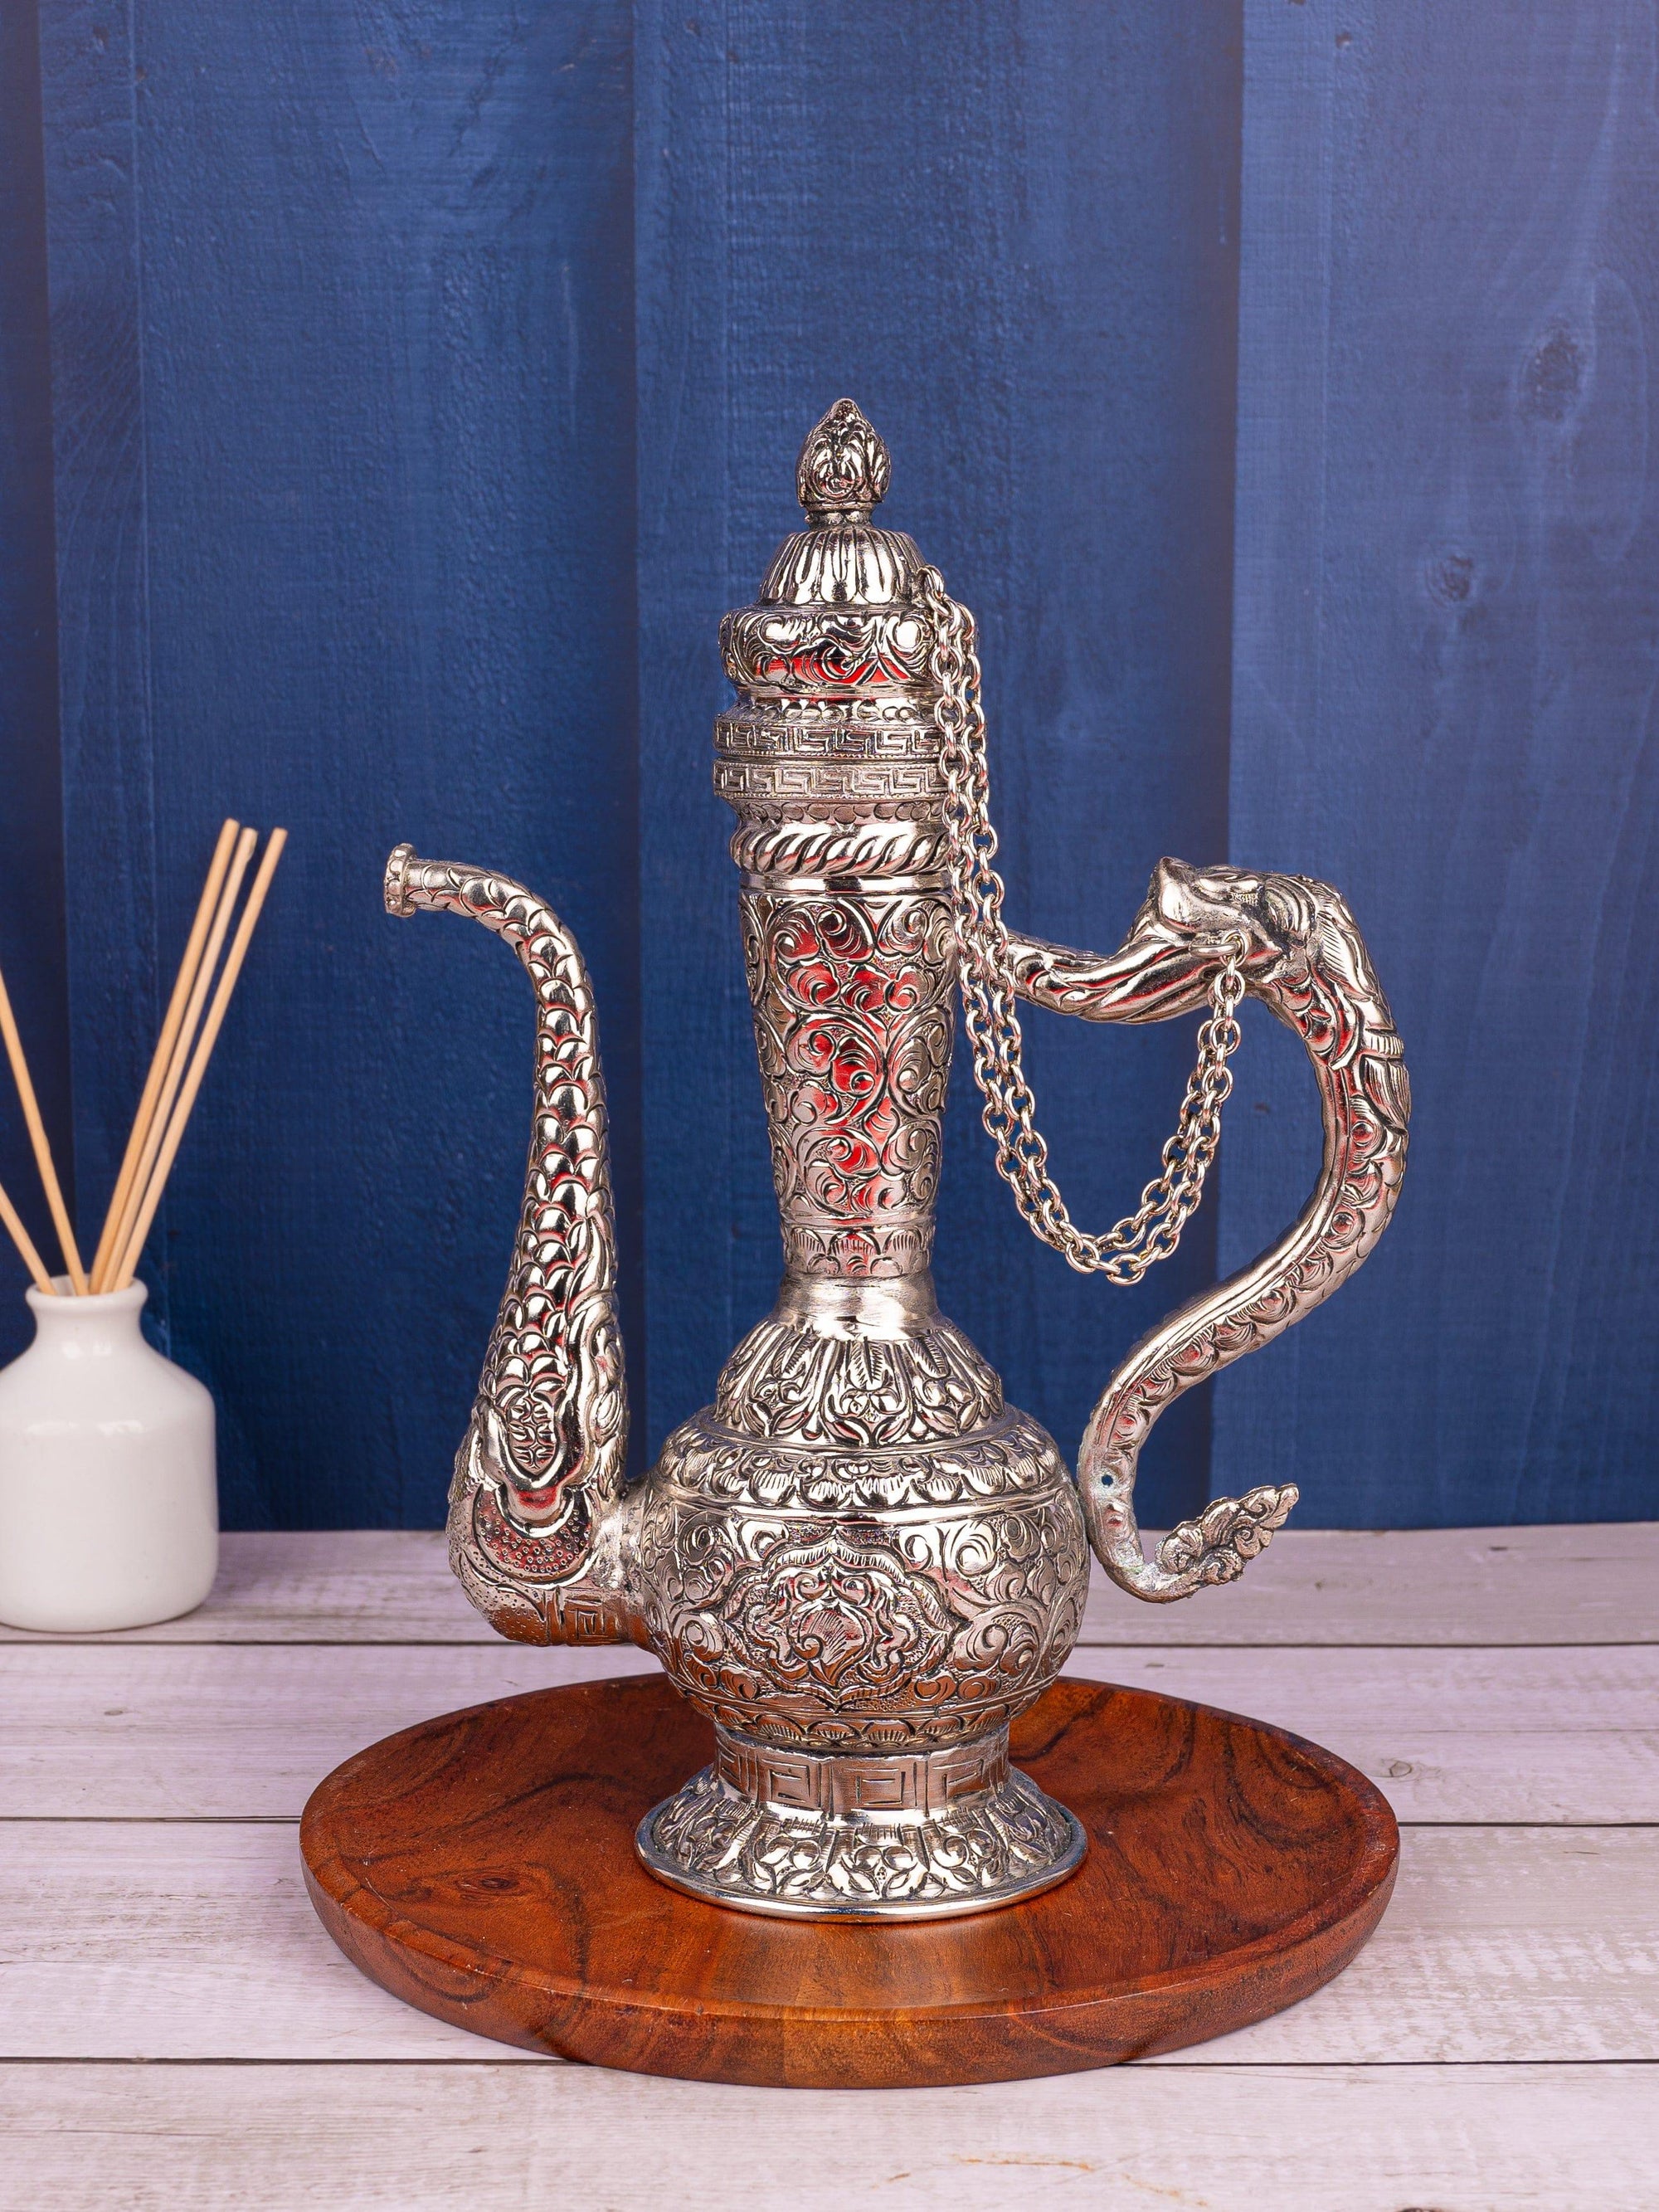 Metal Crafted Antique Silver Finish Surahi / Decanter Decorative Showpiece - The Heritage Artifacts